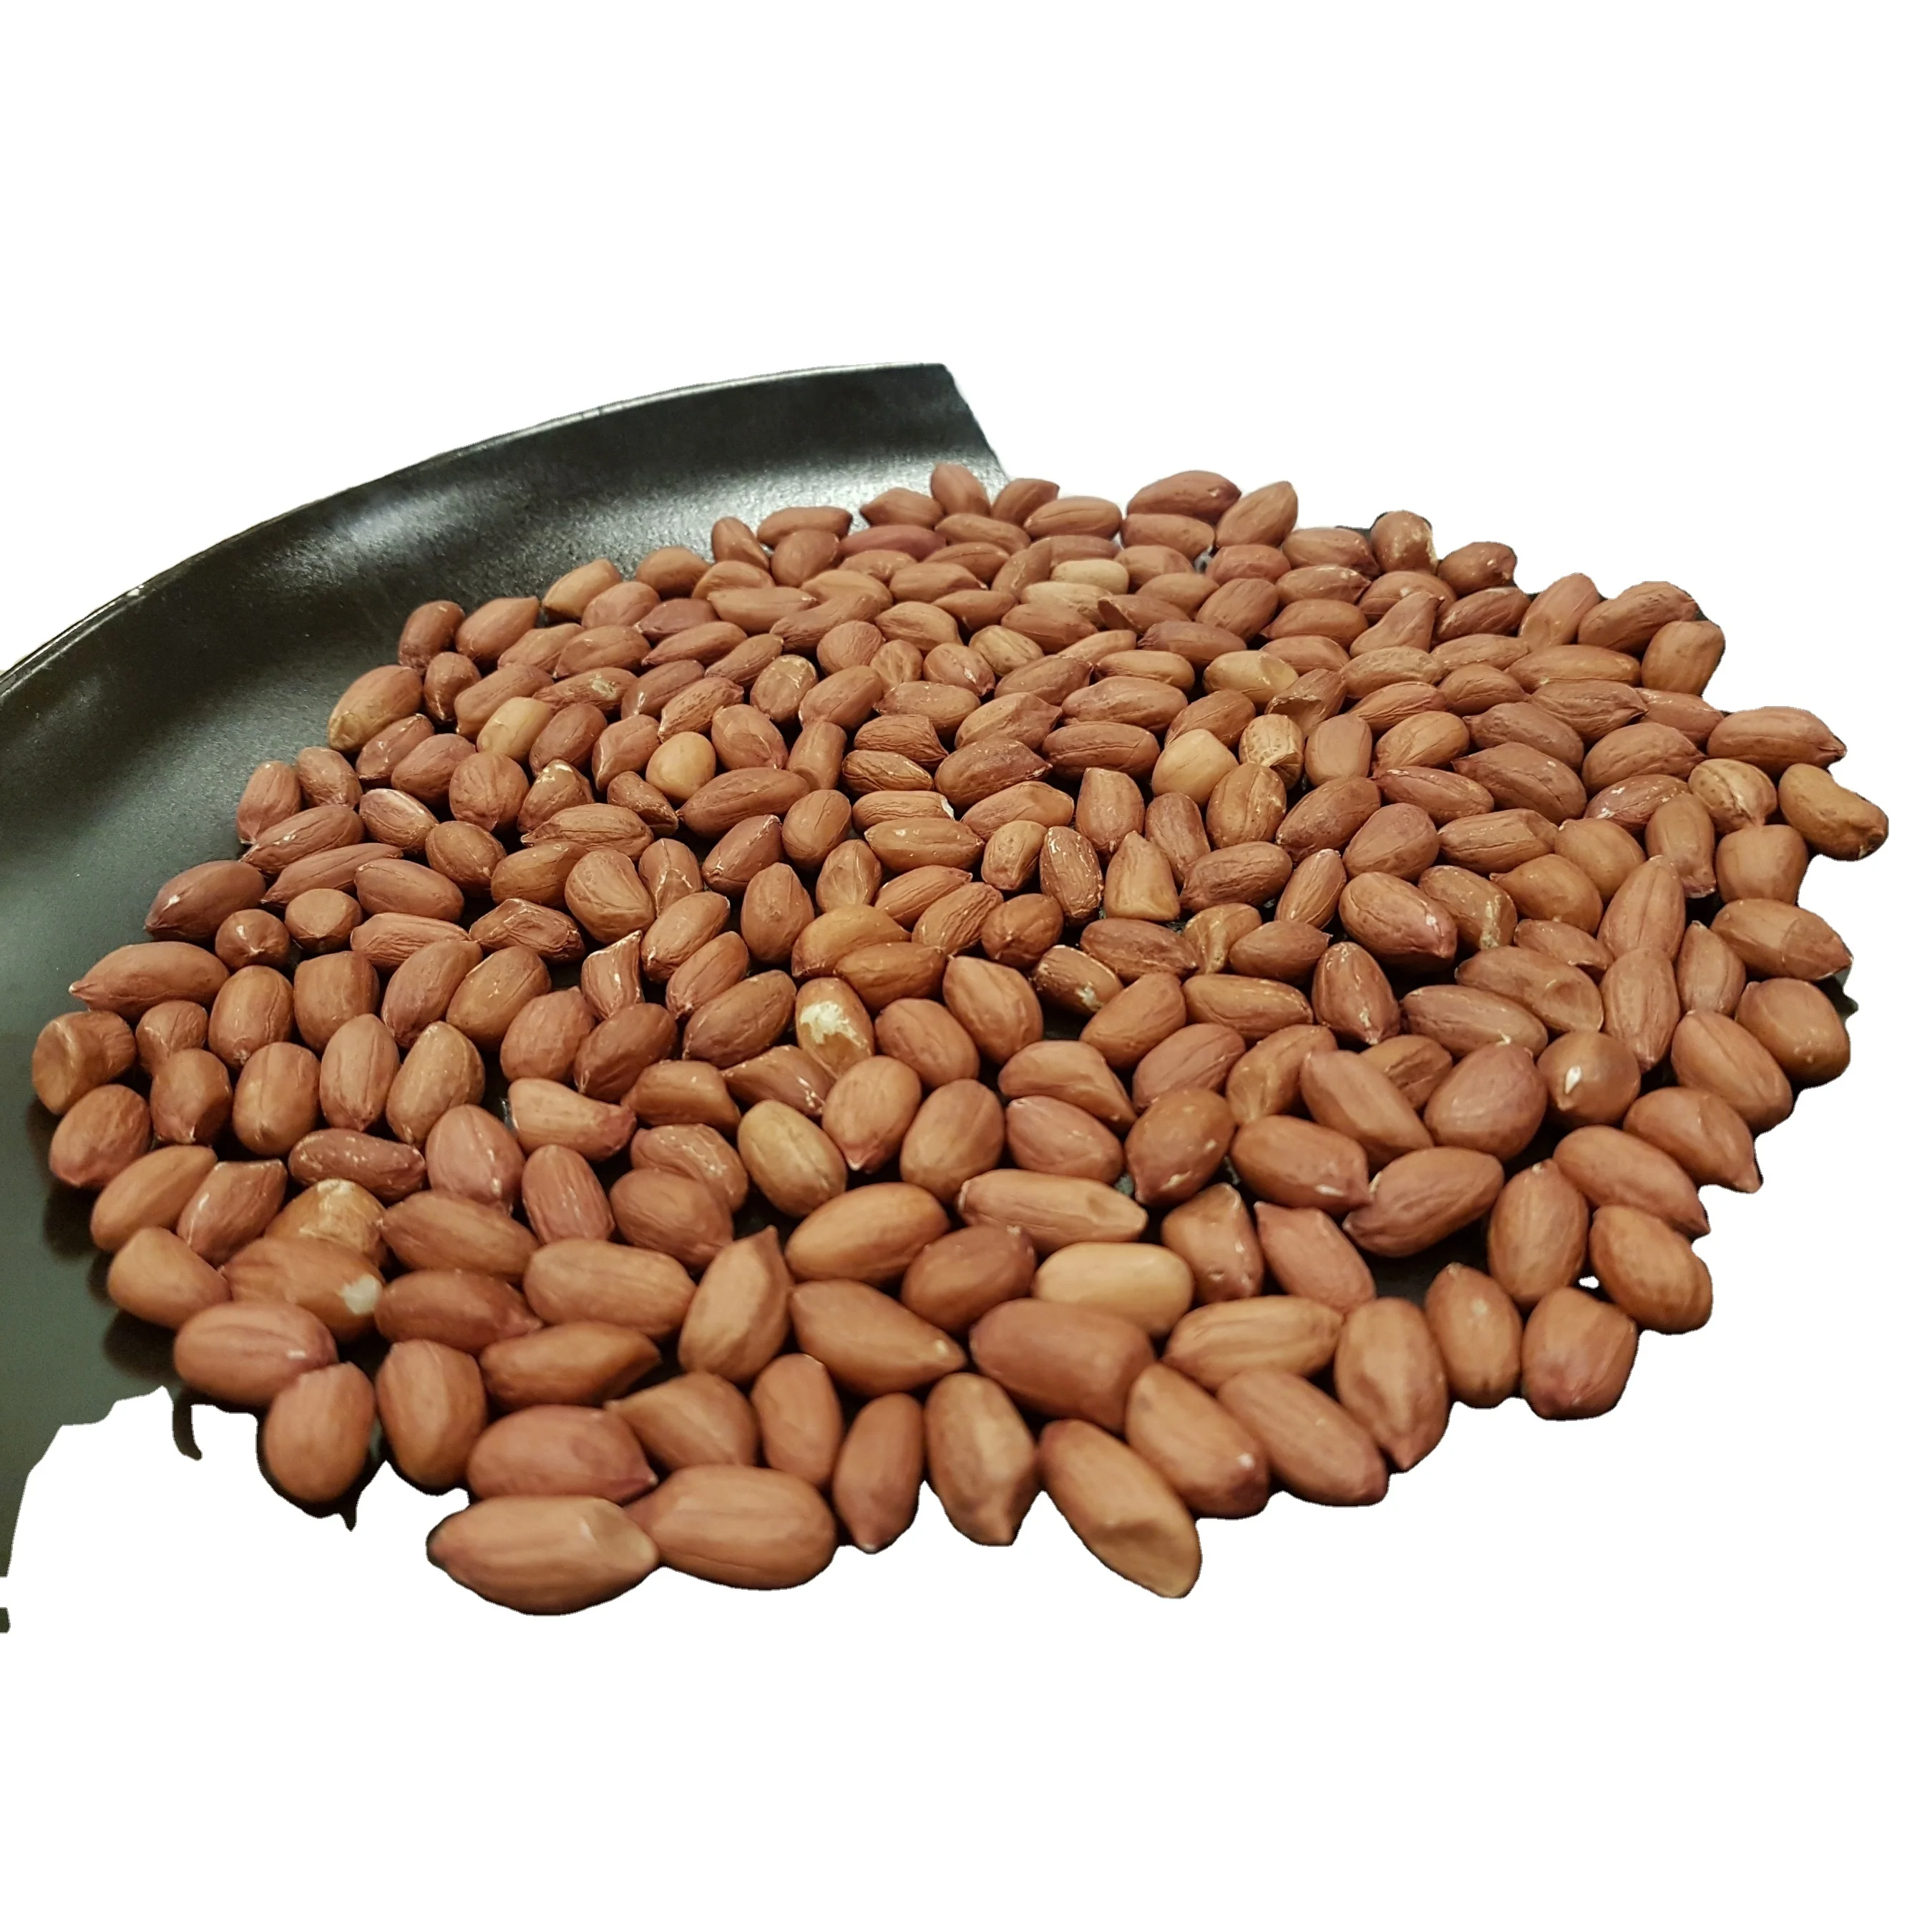 Buy Indian Premium Quality Pinkish JAVA Peanuts for Snack Factory Organic Peanut Supply From Indian price